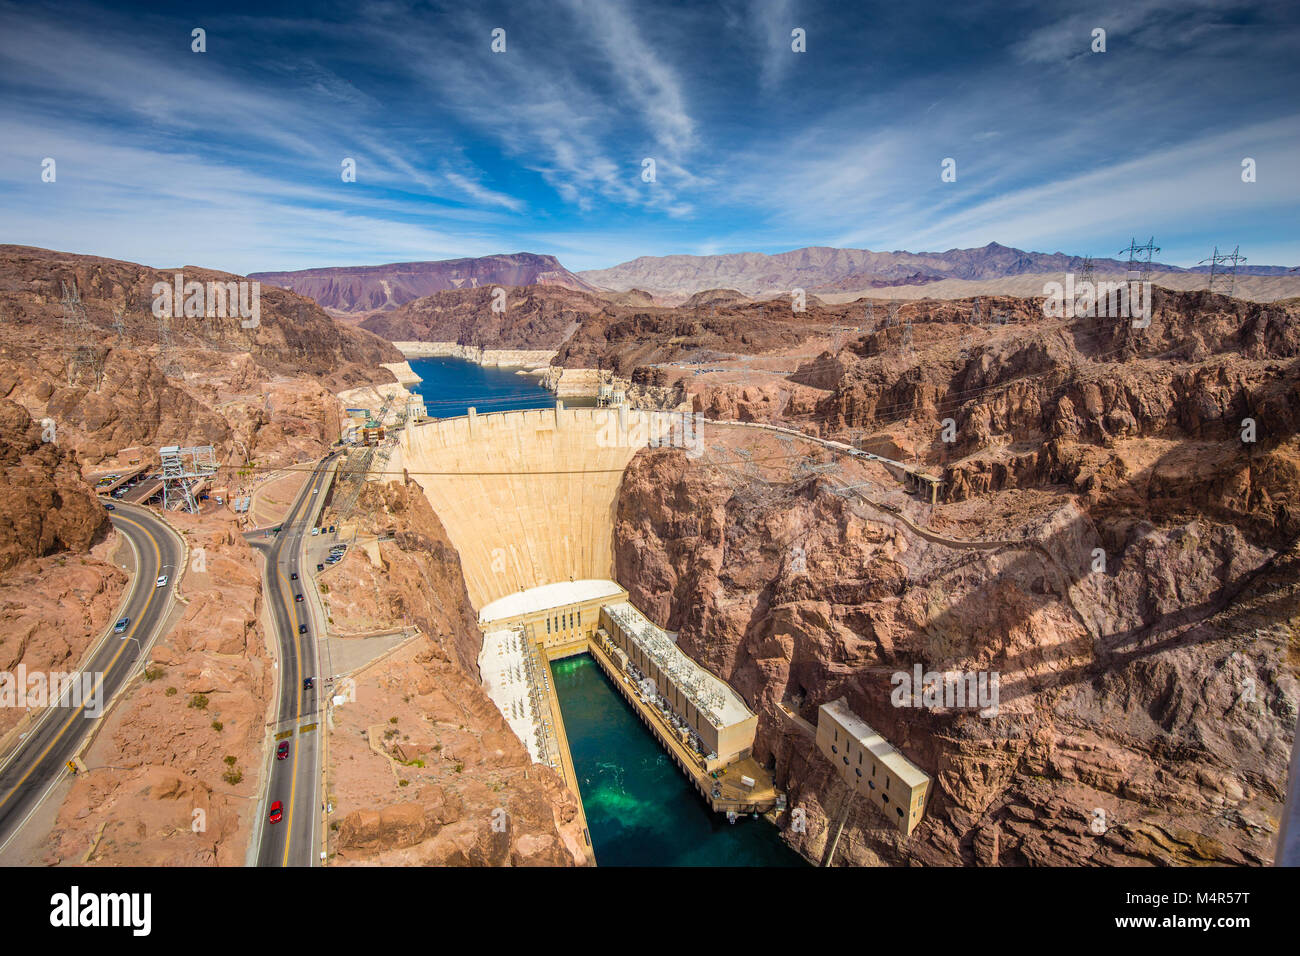 Aerial wide angle view of famous Hoover Dam, a major tourist attraction located on the border between the states of Nevada and Arizona, on a beautiful Stock Photo